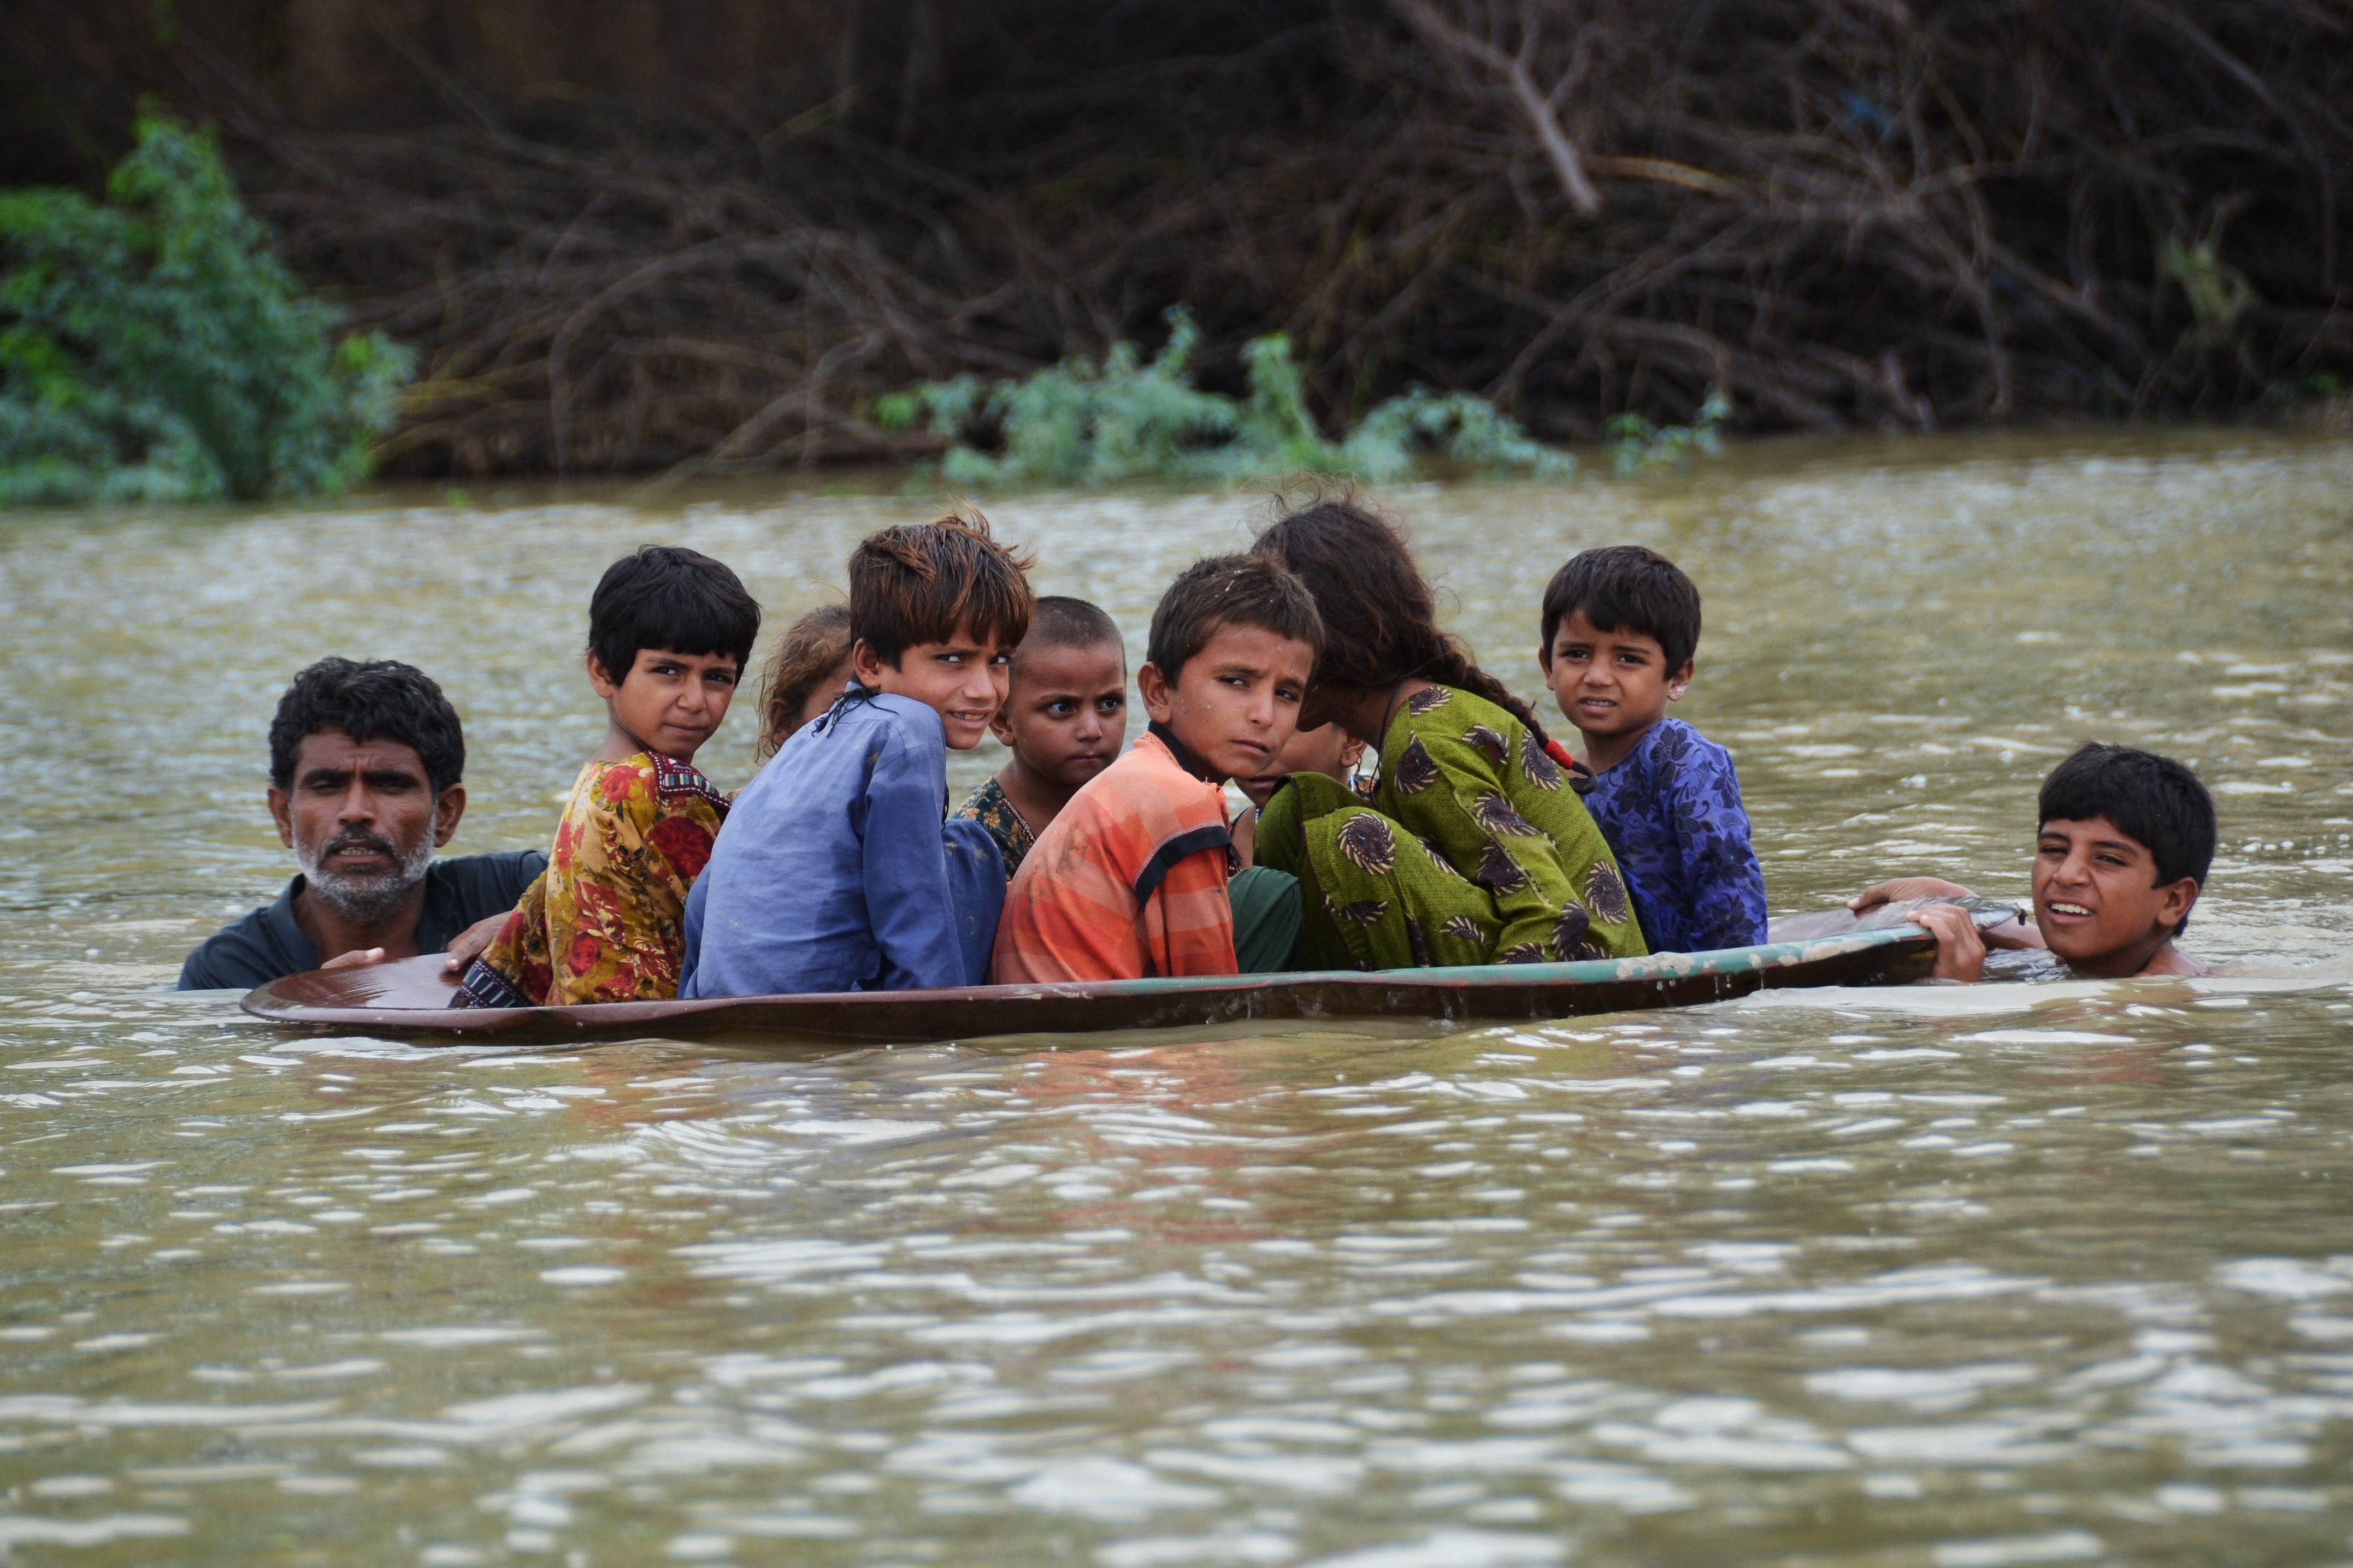 File. A man (L) along with a youth use a satellite dish to move children across a flooded area after heavy monsoon rainfalls in Jaffarabad district, Balochistan province, on 26 August 2022